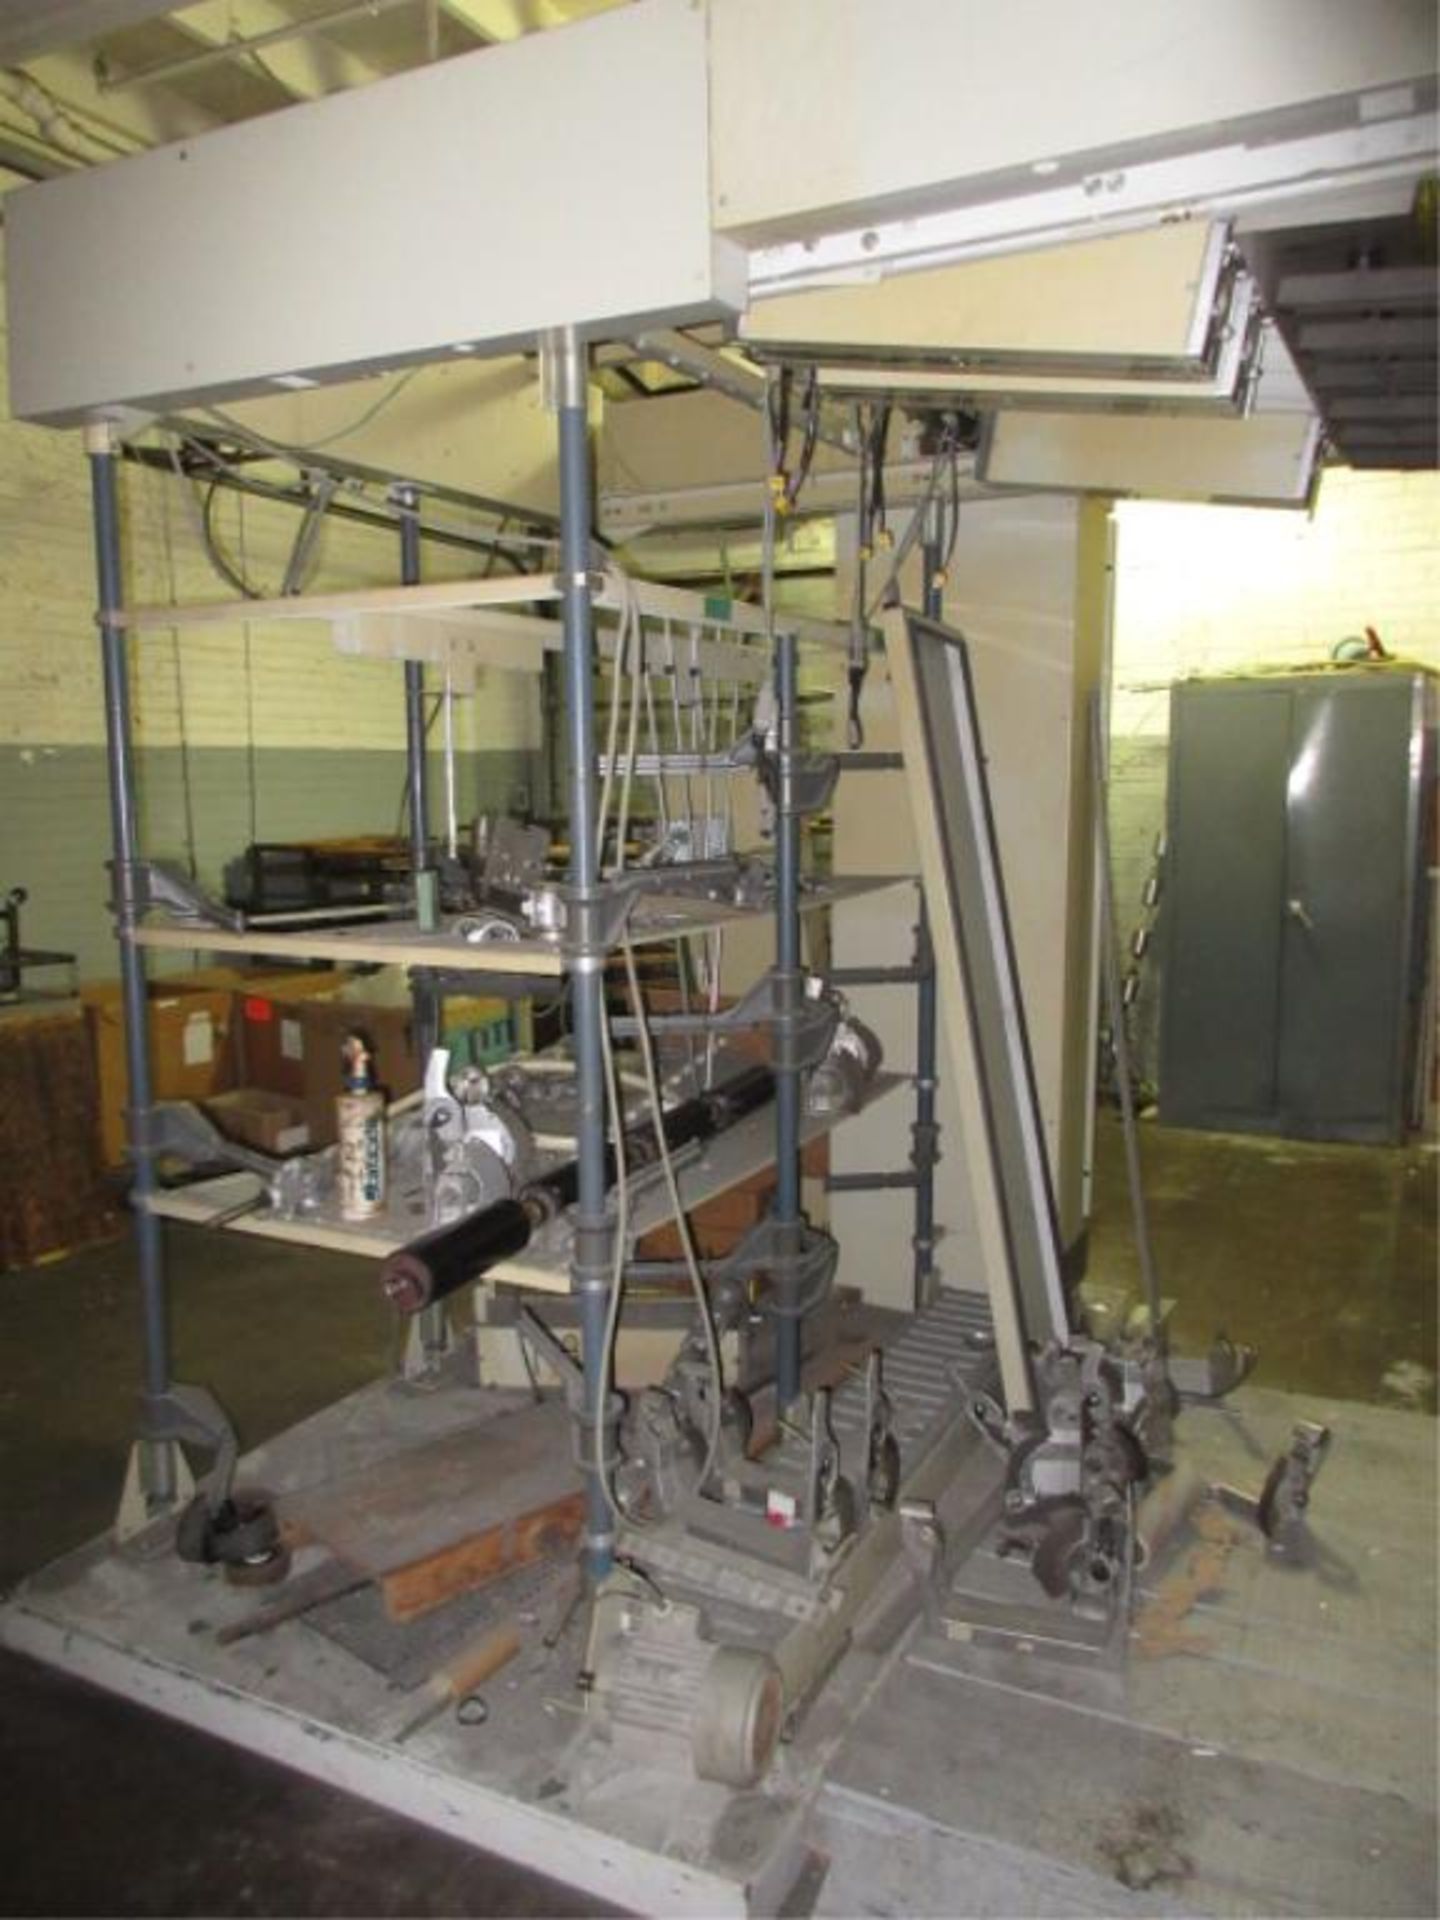 ICBT FT15-E3 HT Sample Texturing Machine, (1996), parted out, not in running condition, please - Image 3 of 7